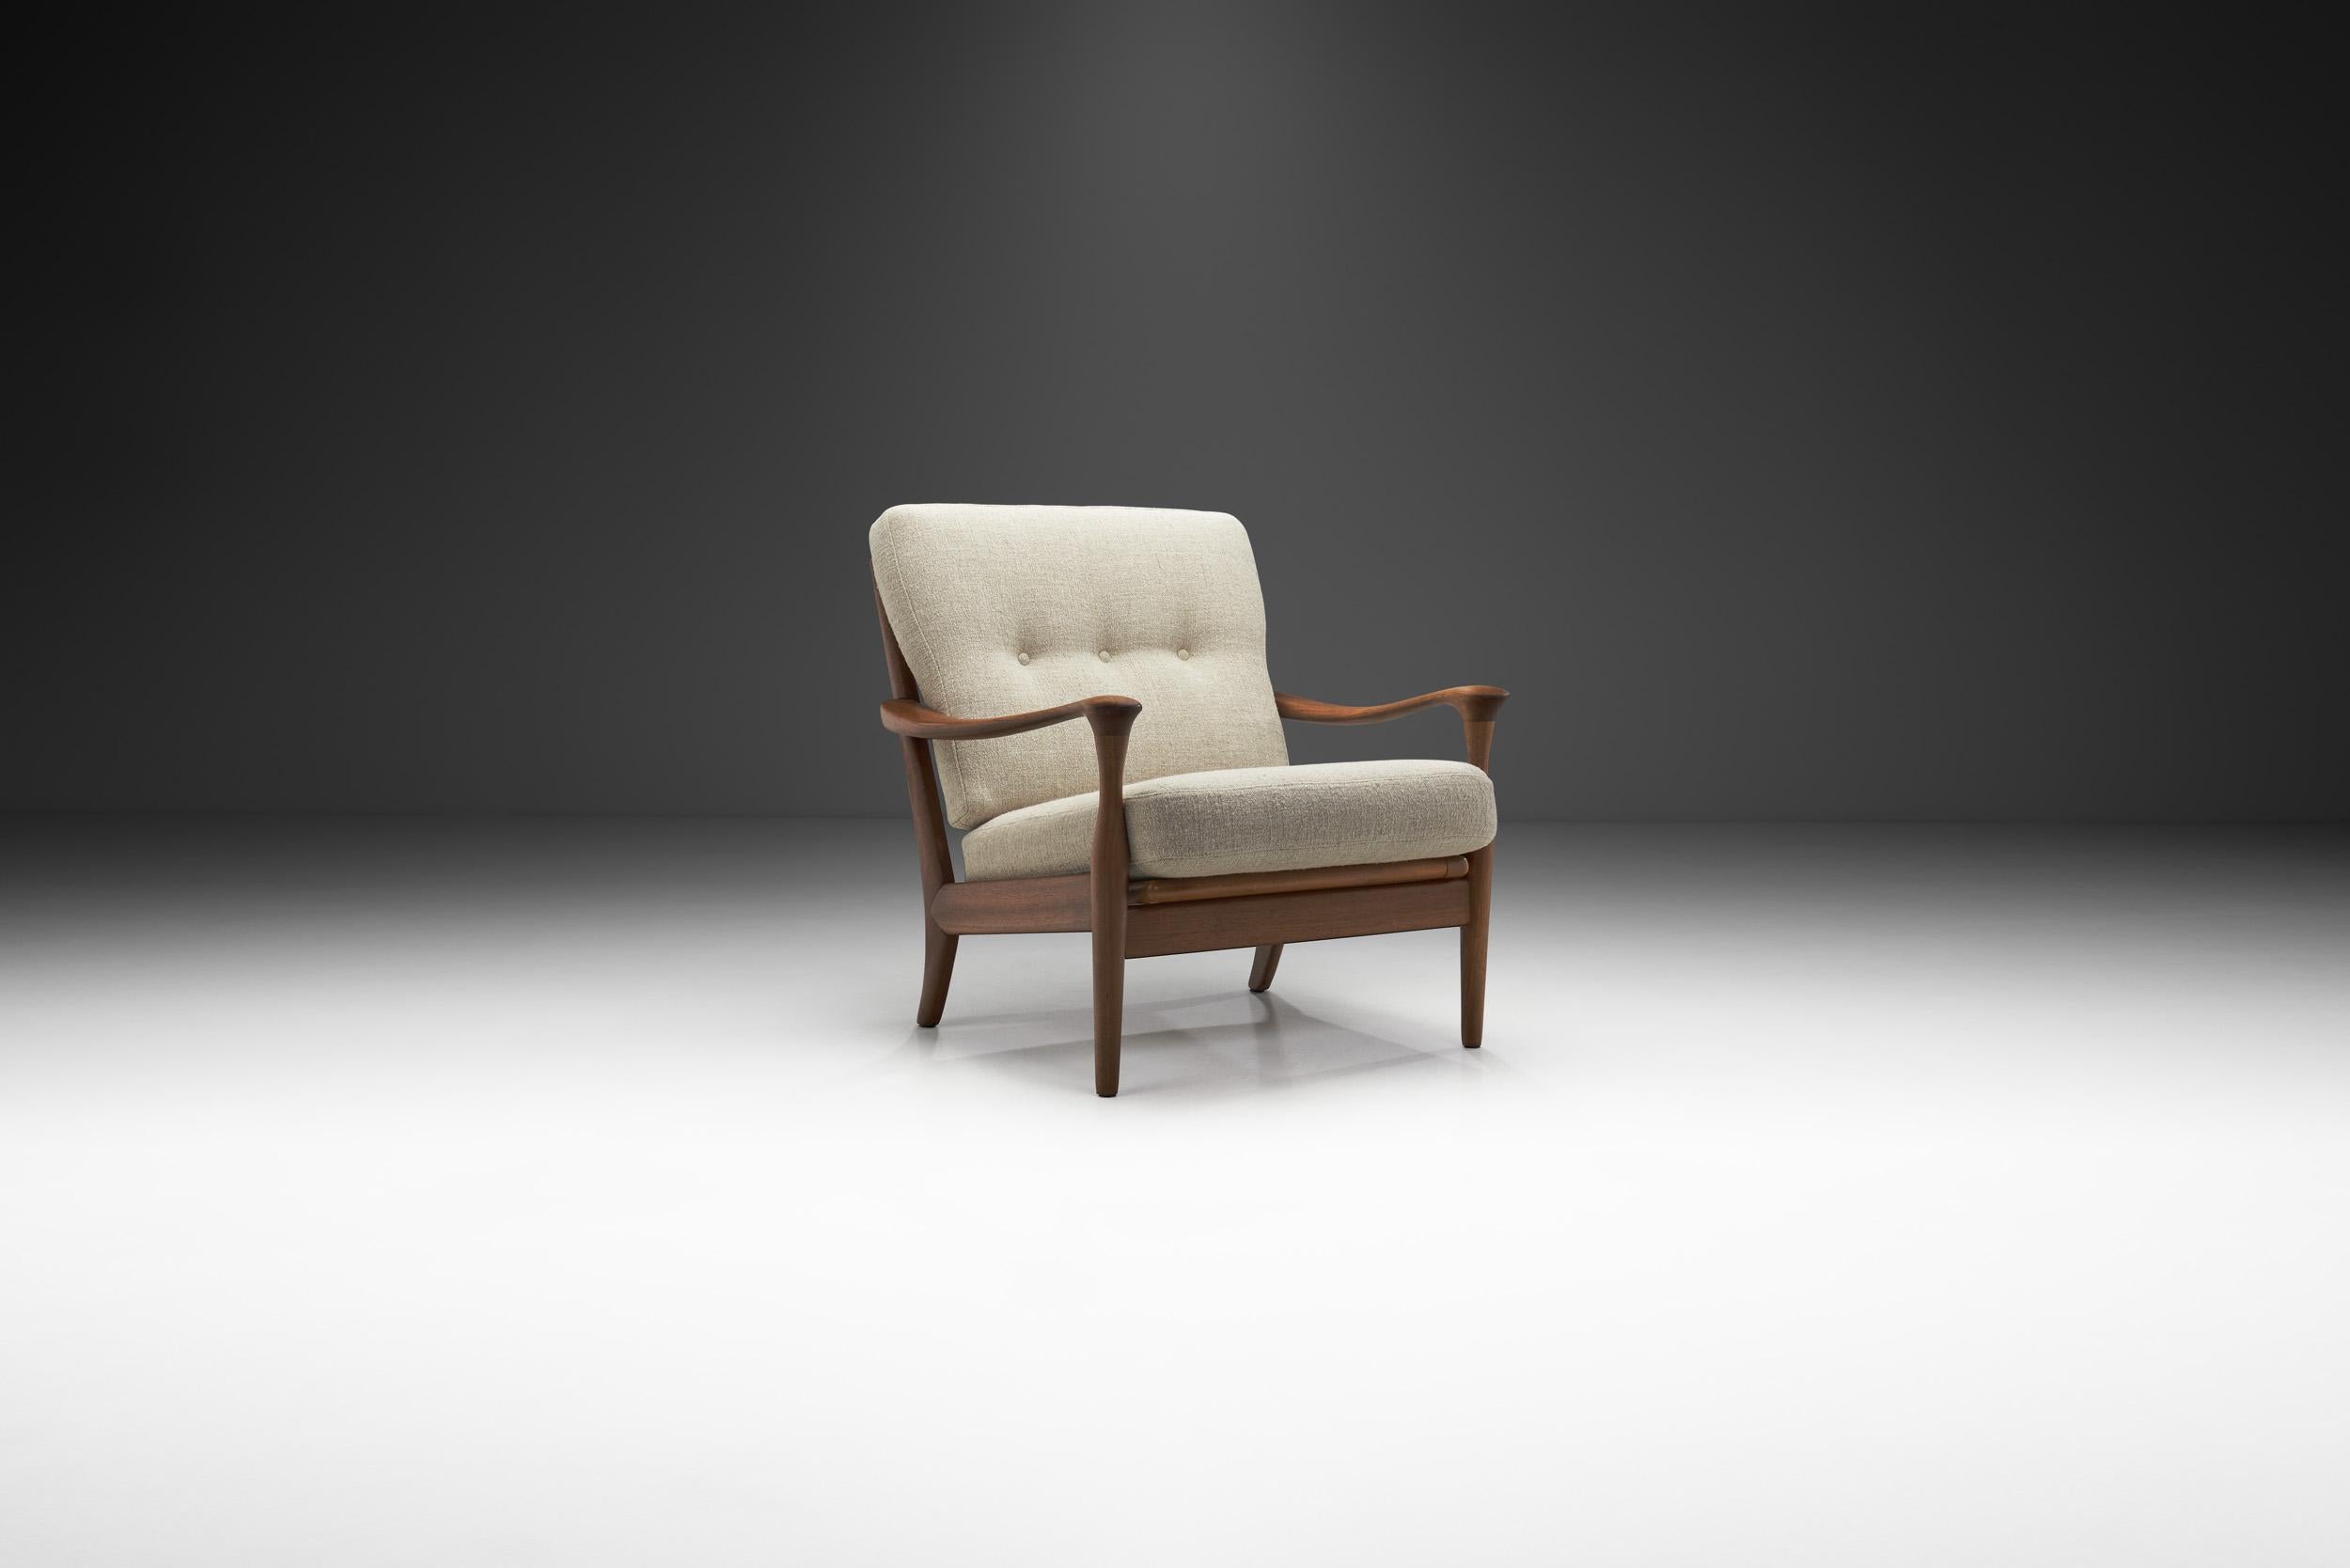 This beautiful armchair features a modest and elegant design. From the stunning and decorative slat back to the expert woodworking, this armchair has the best qualities of mid-century modernism’s visual and material qualities.

This armchair is